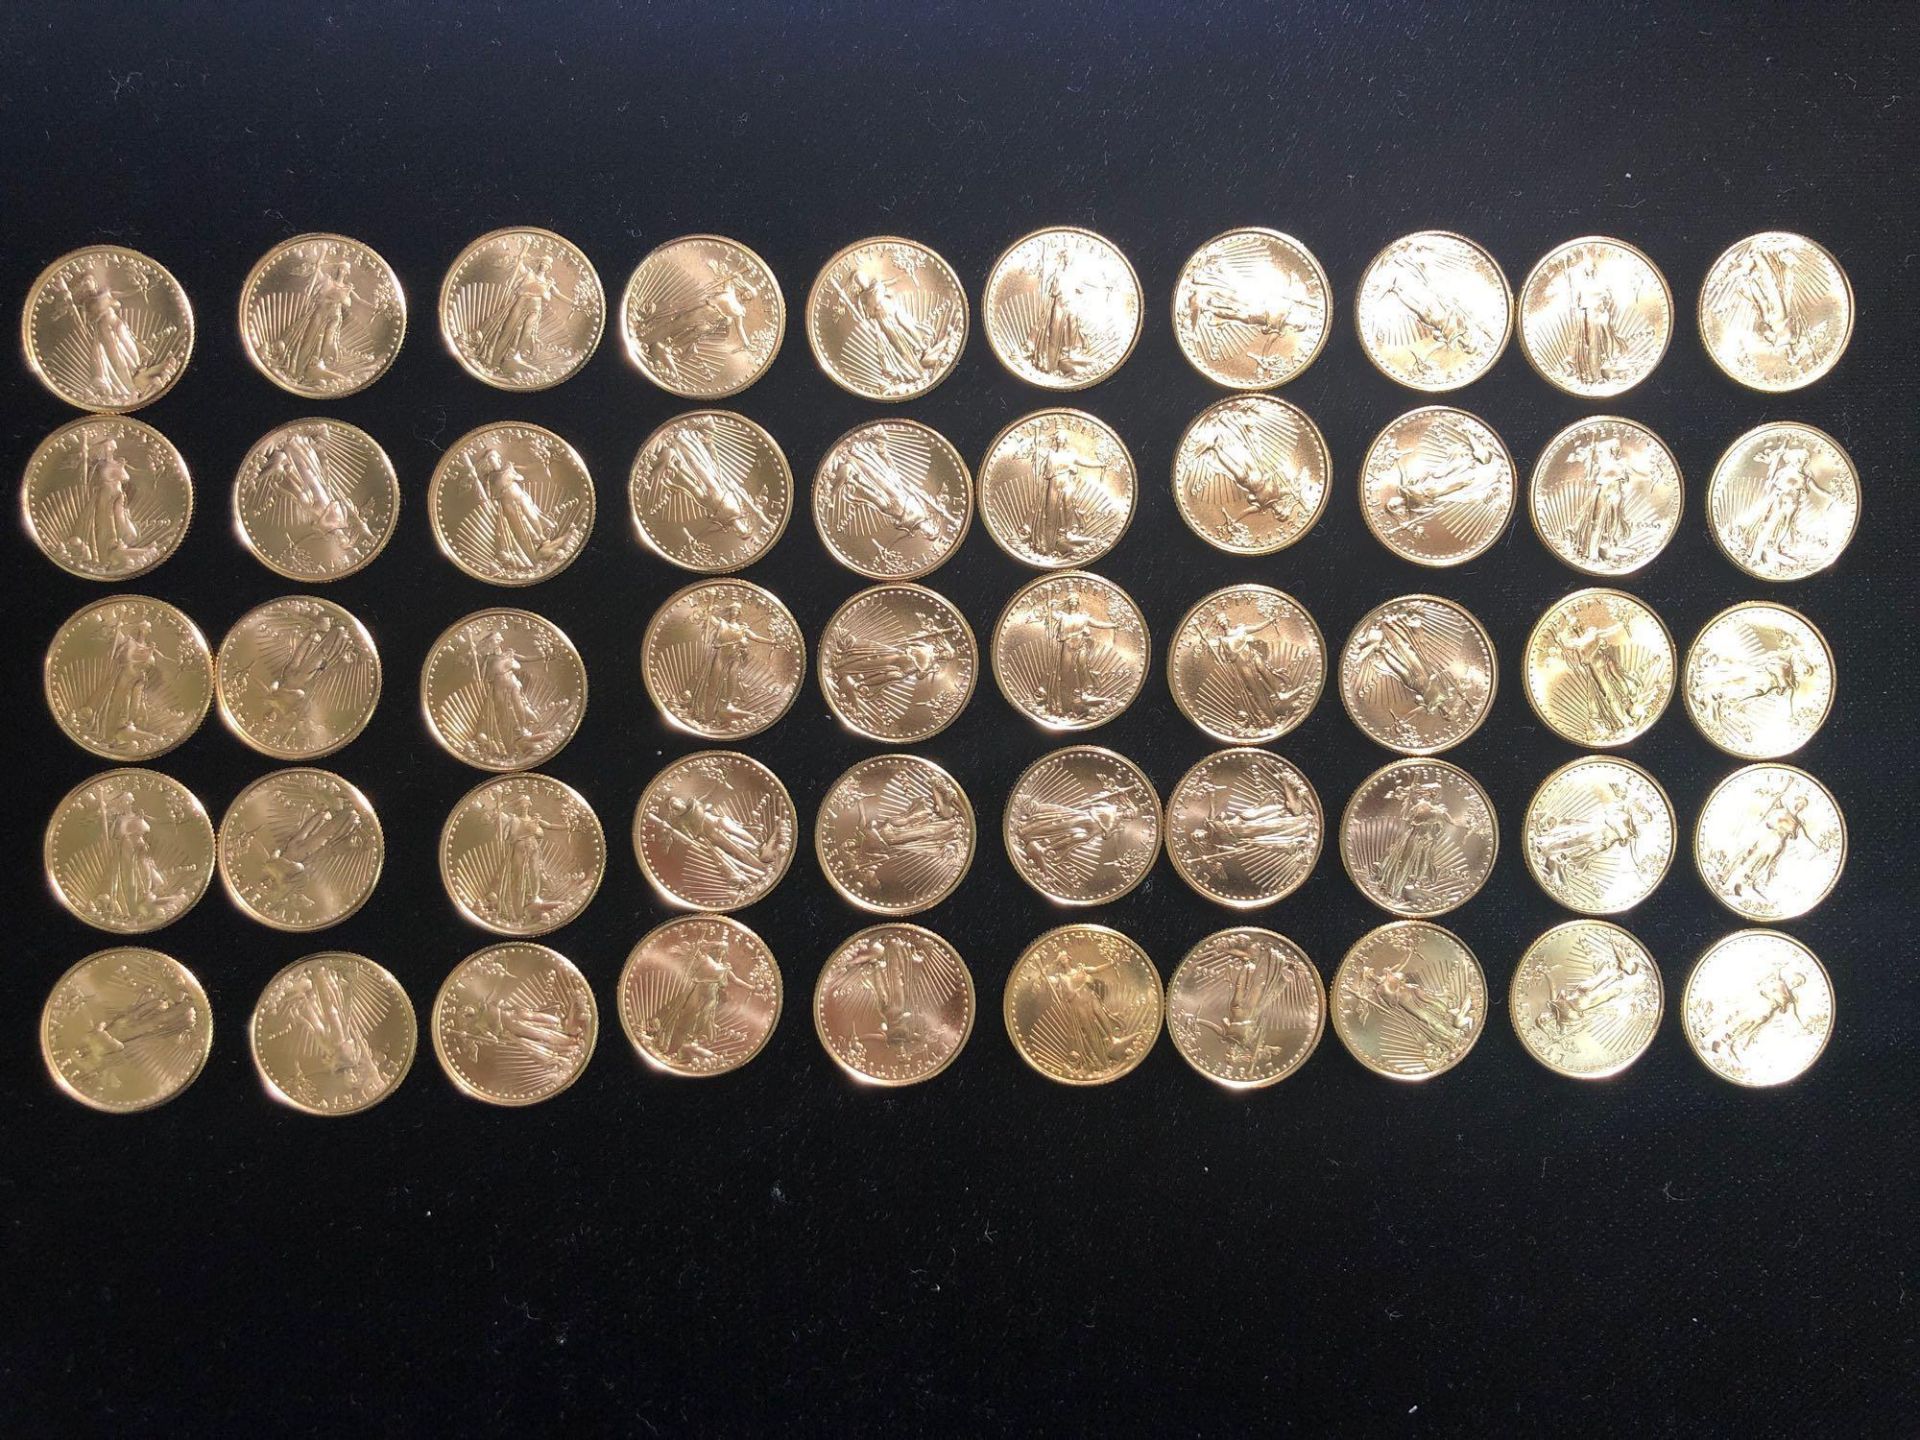 TUBE OF 50 GOLD AMERICAN EAGLE 1/10 OZT COINS DATED 1999 - Image 3 of 8